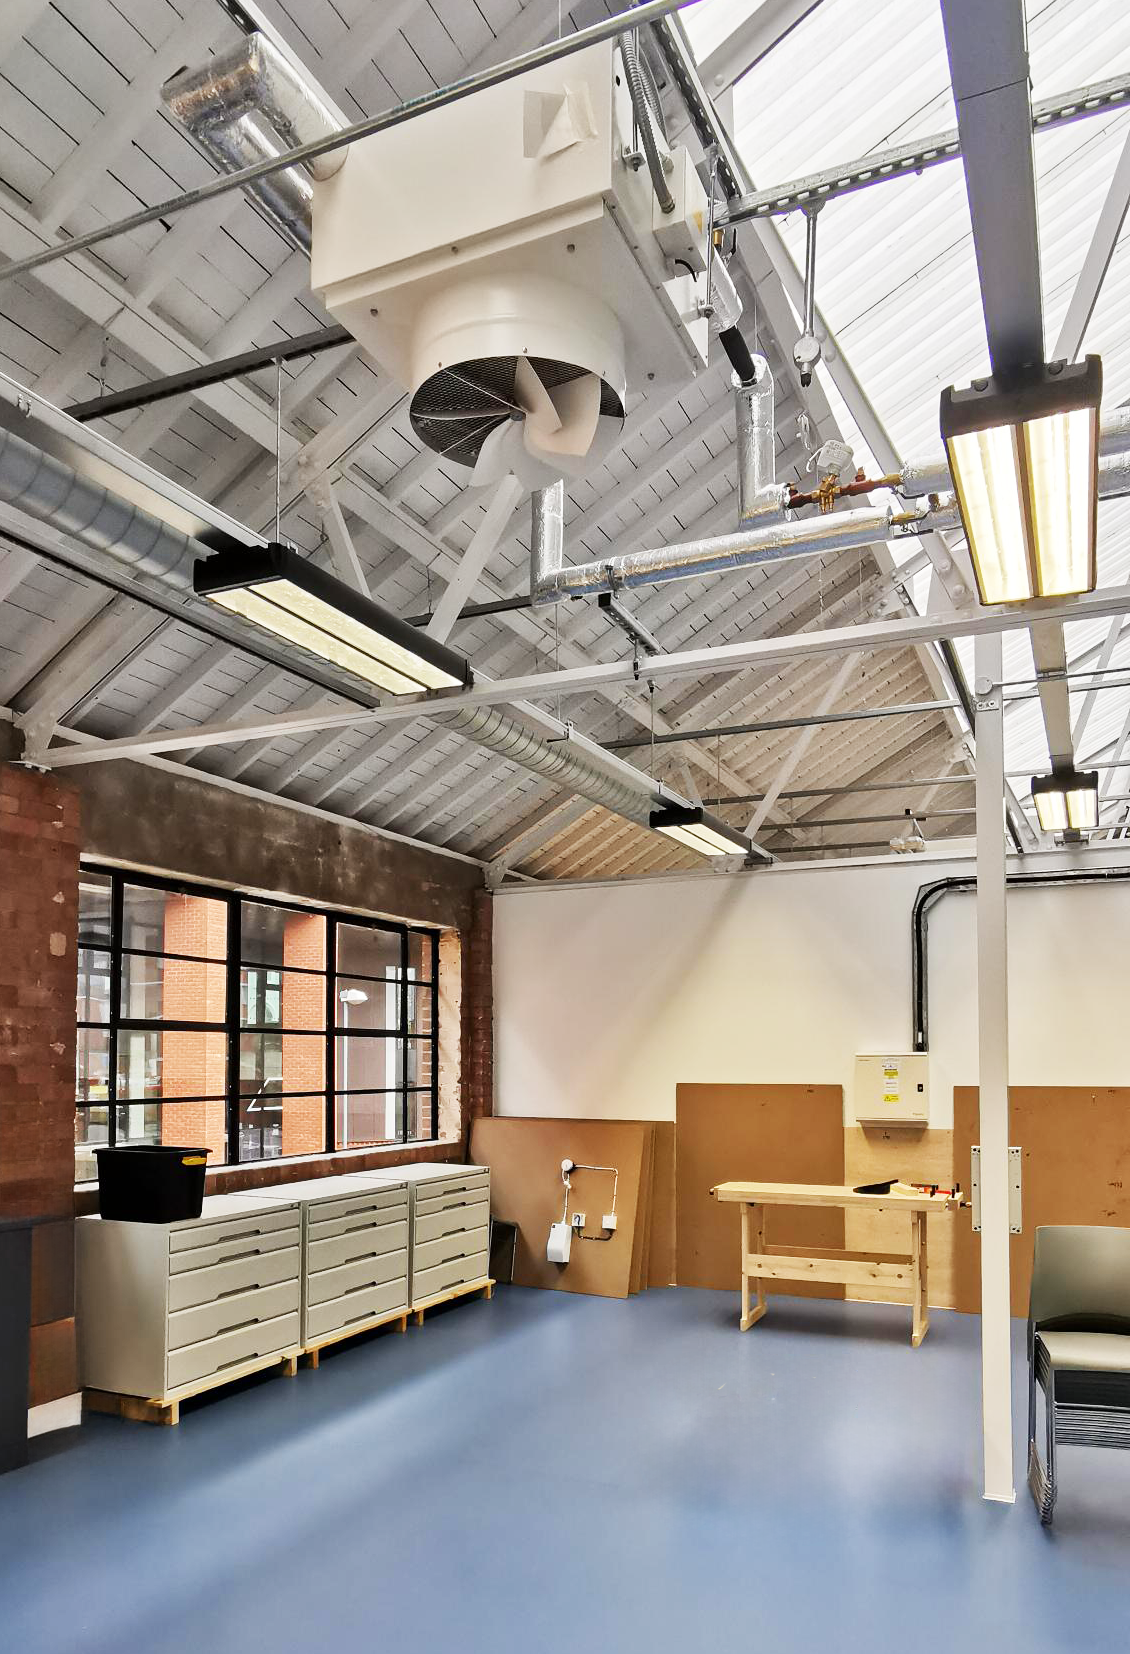 From Print Works to Learning Hubs: Biddle Uniflow Air Heaters Power the James Cond Revival